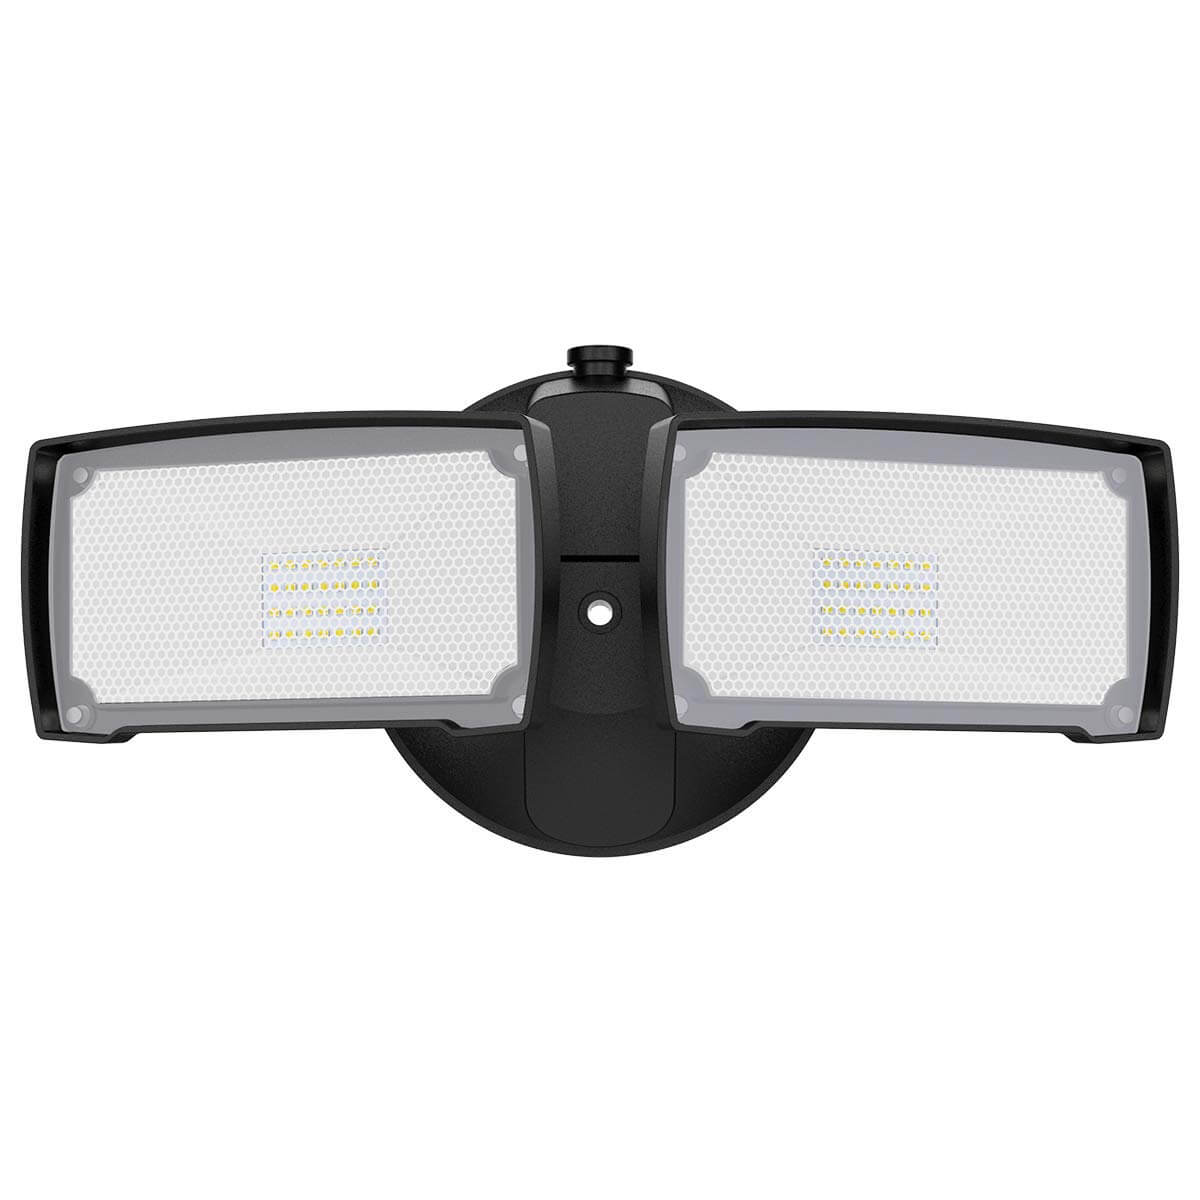 LED Flood Light 28W 3000lm Adjustable Heads Switch Controlled